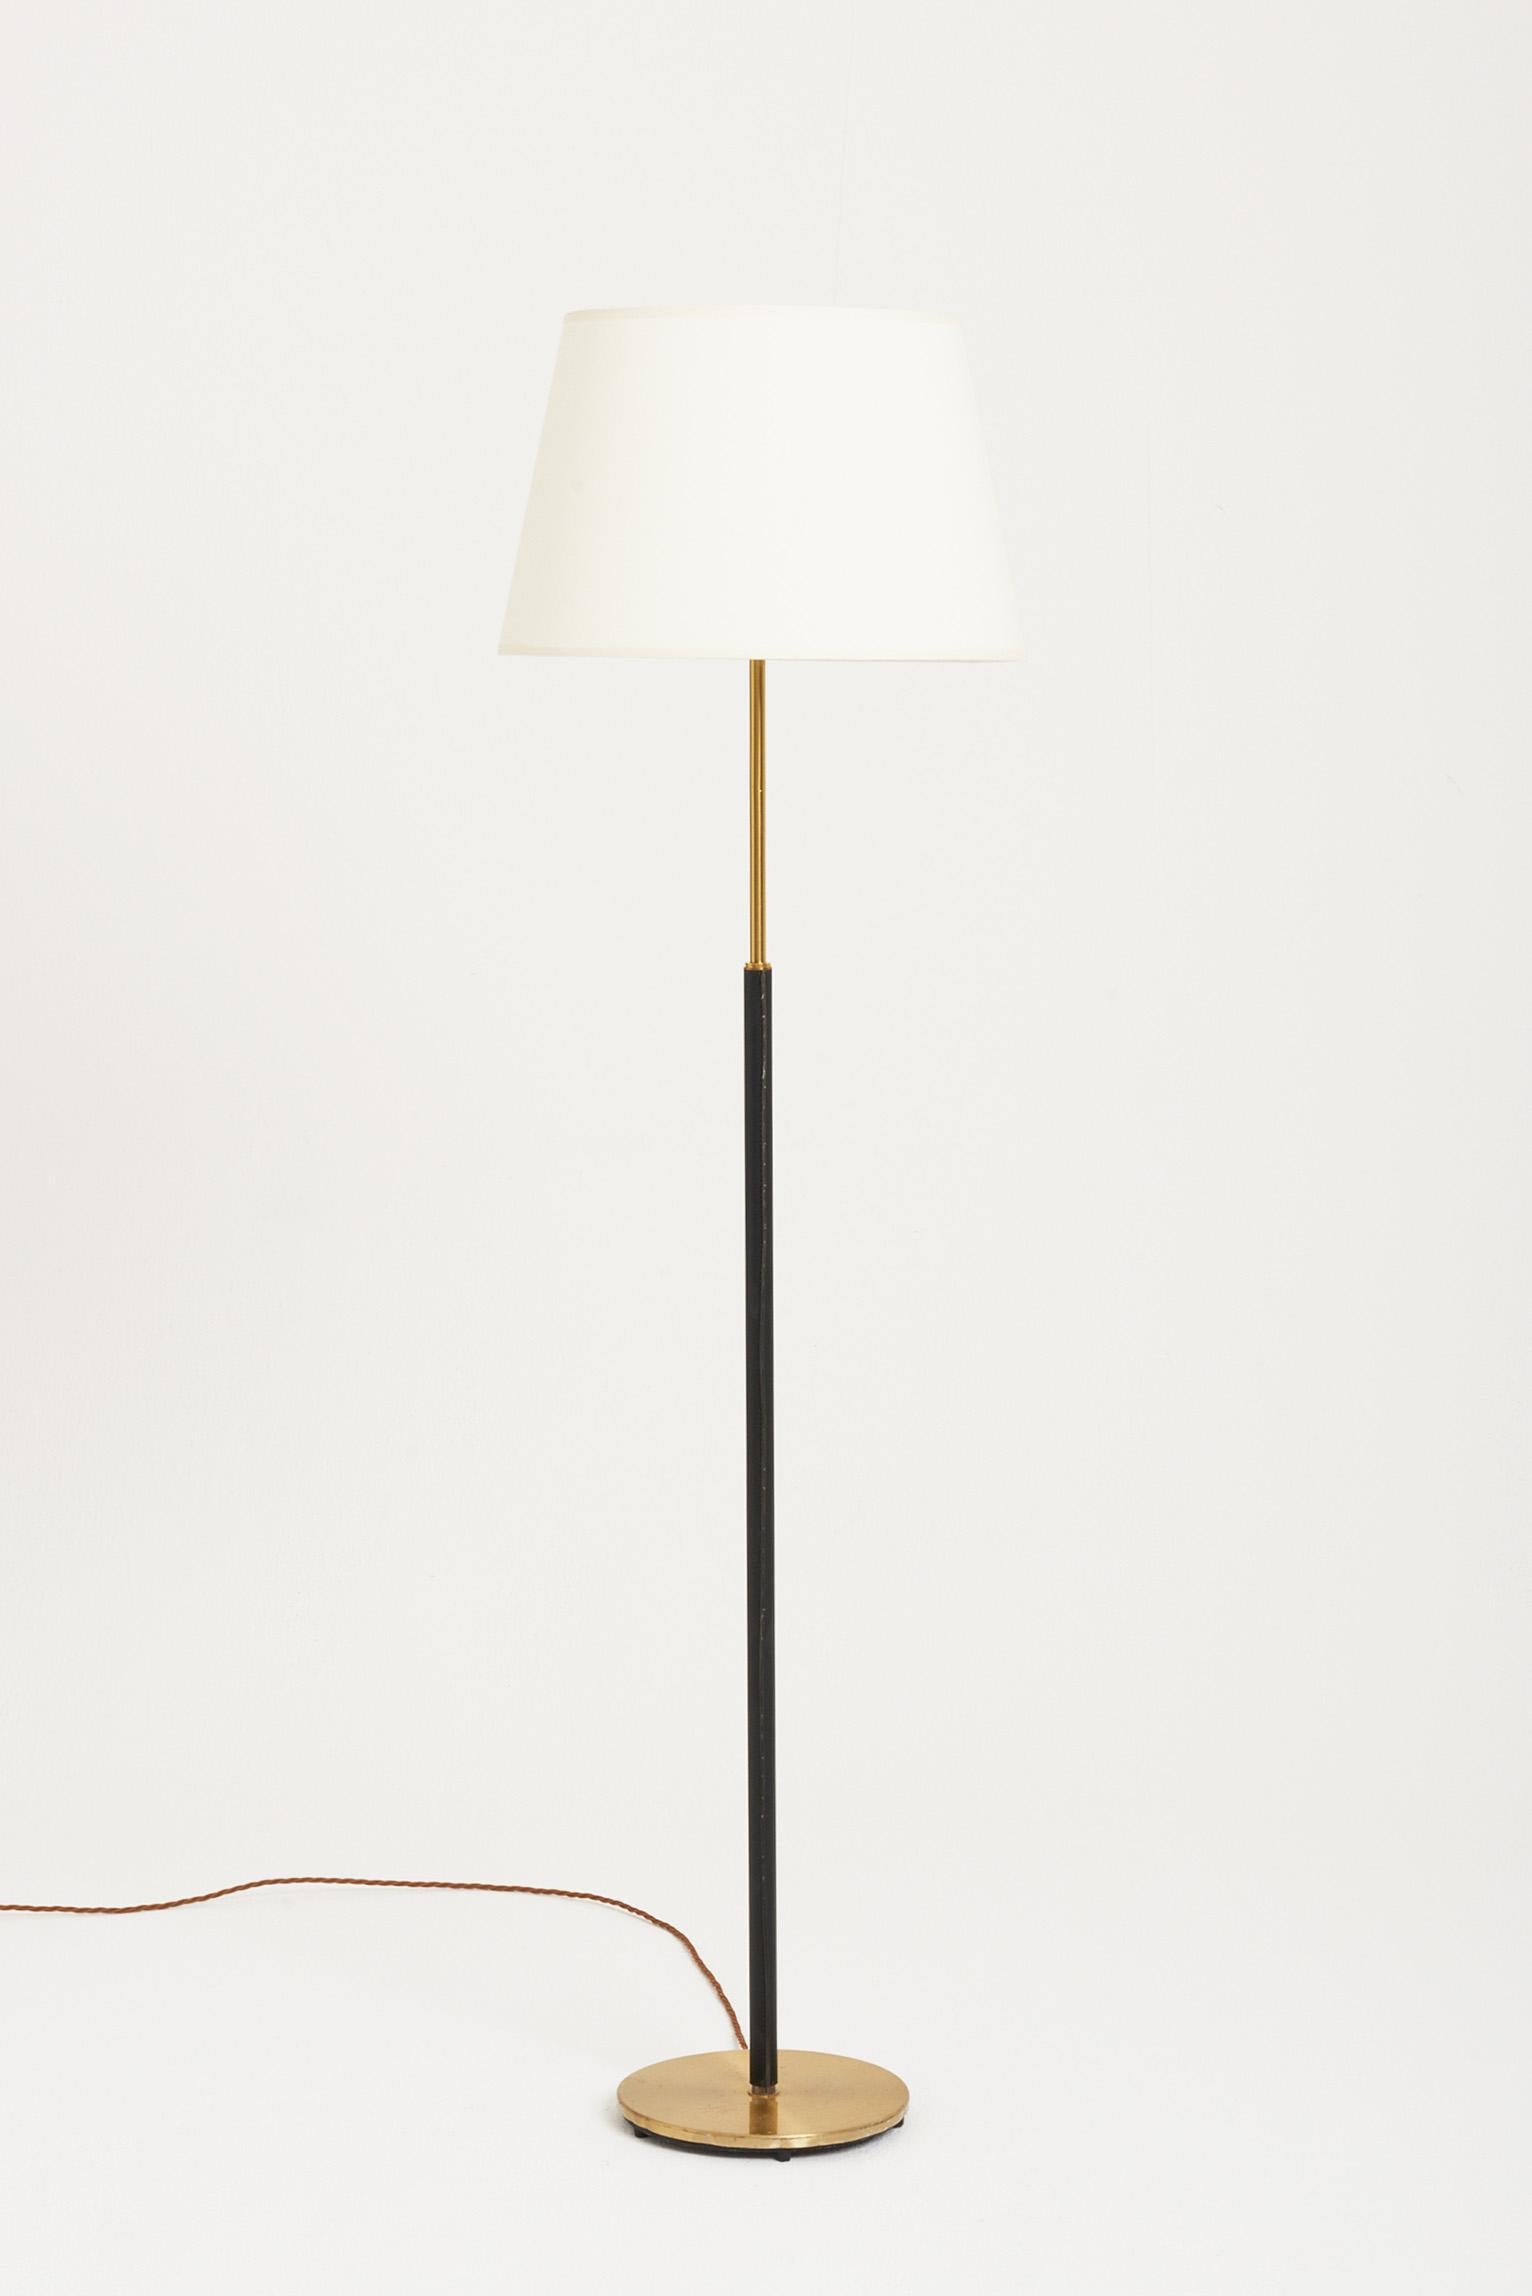 A black leather and brass floor lamp.
Sweden, third quarter of the 20th century.
Measures: With the shade: 143 cm high by 41 cm diameter.
Lamp base only: 123 by 24 cm diameter.